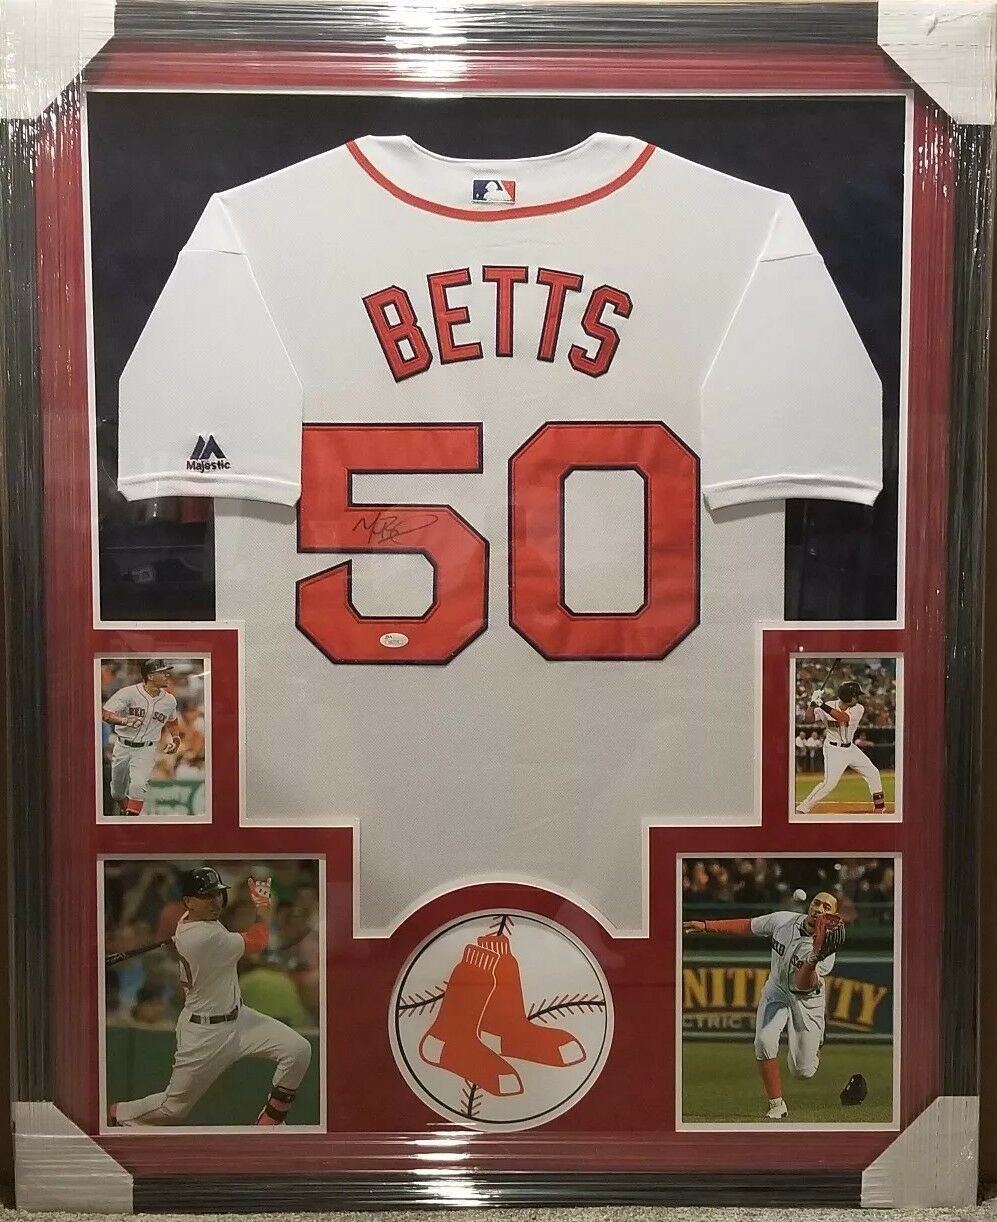 mookie betts signed jersey